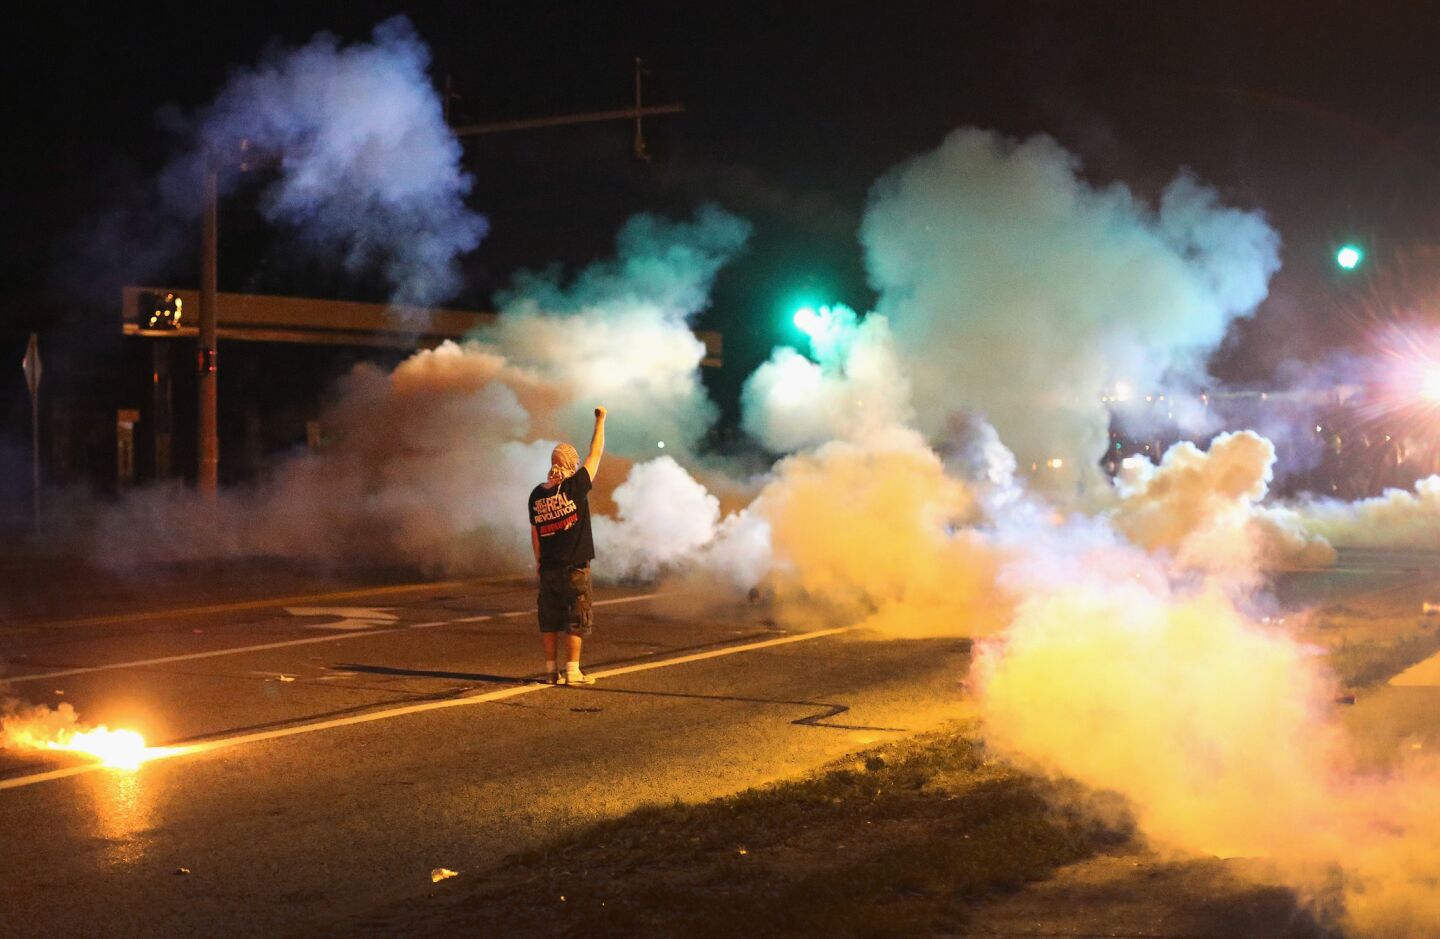 A demonstrator, protesting the shooting death of teenager Michael Brown, stands his ground as police fire tear gas in Ferguson, Mo.